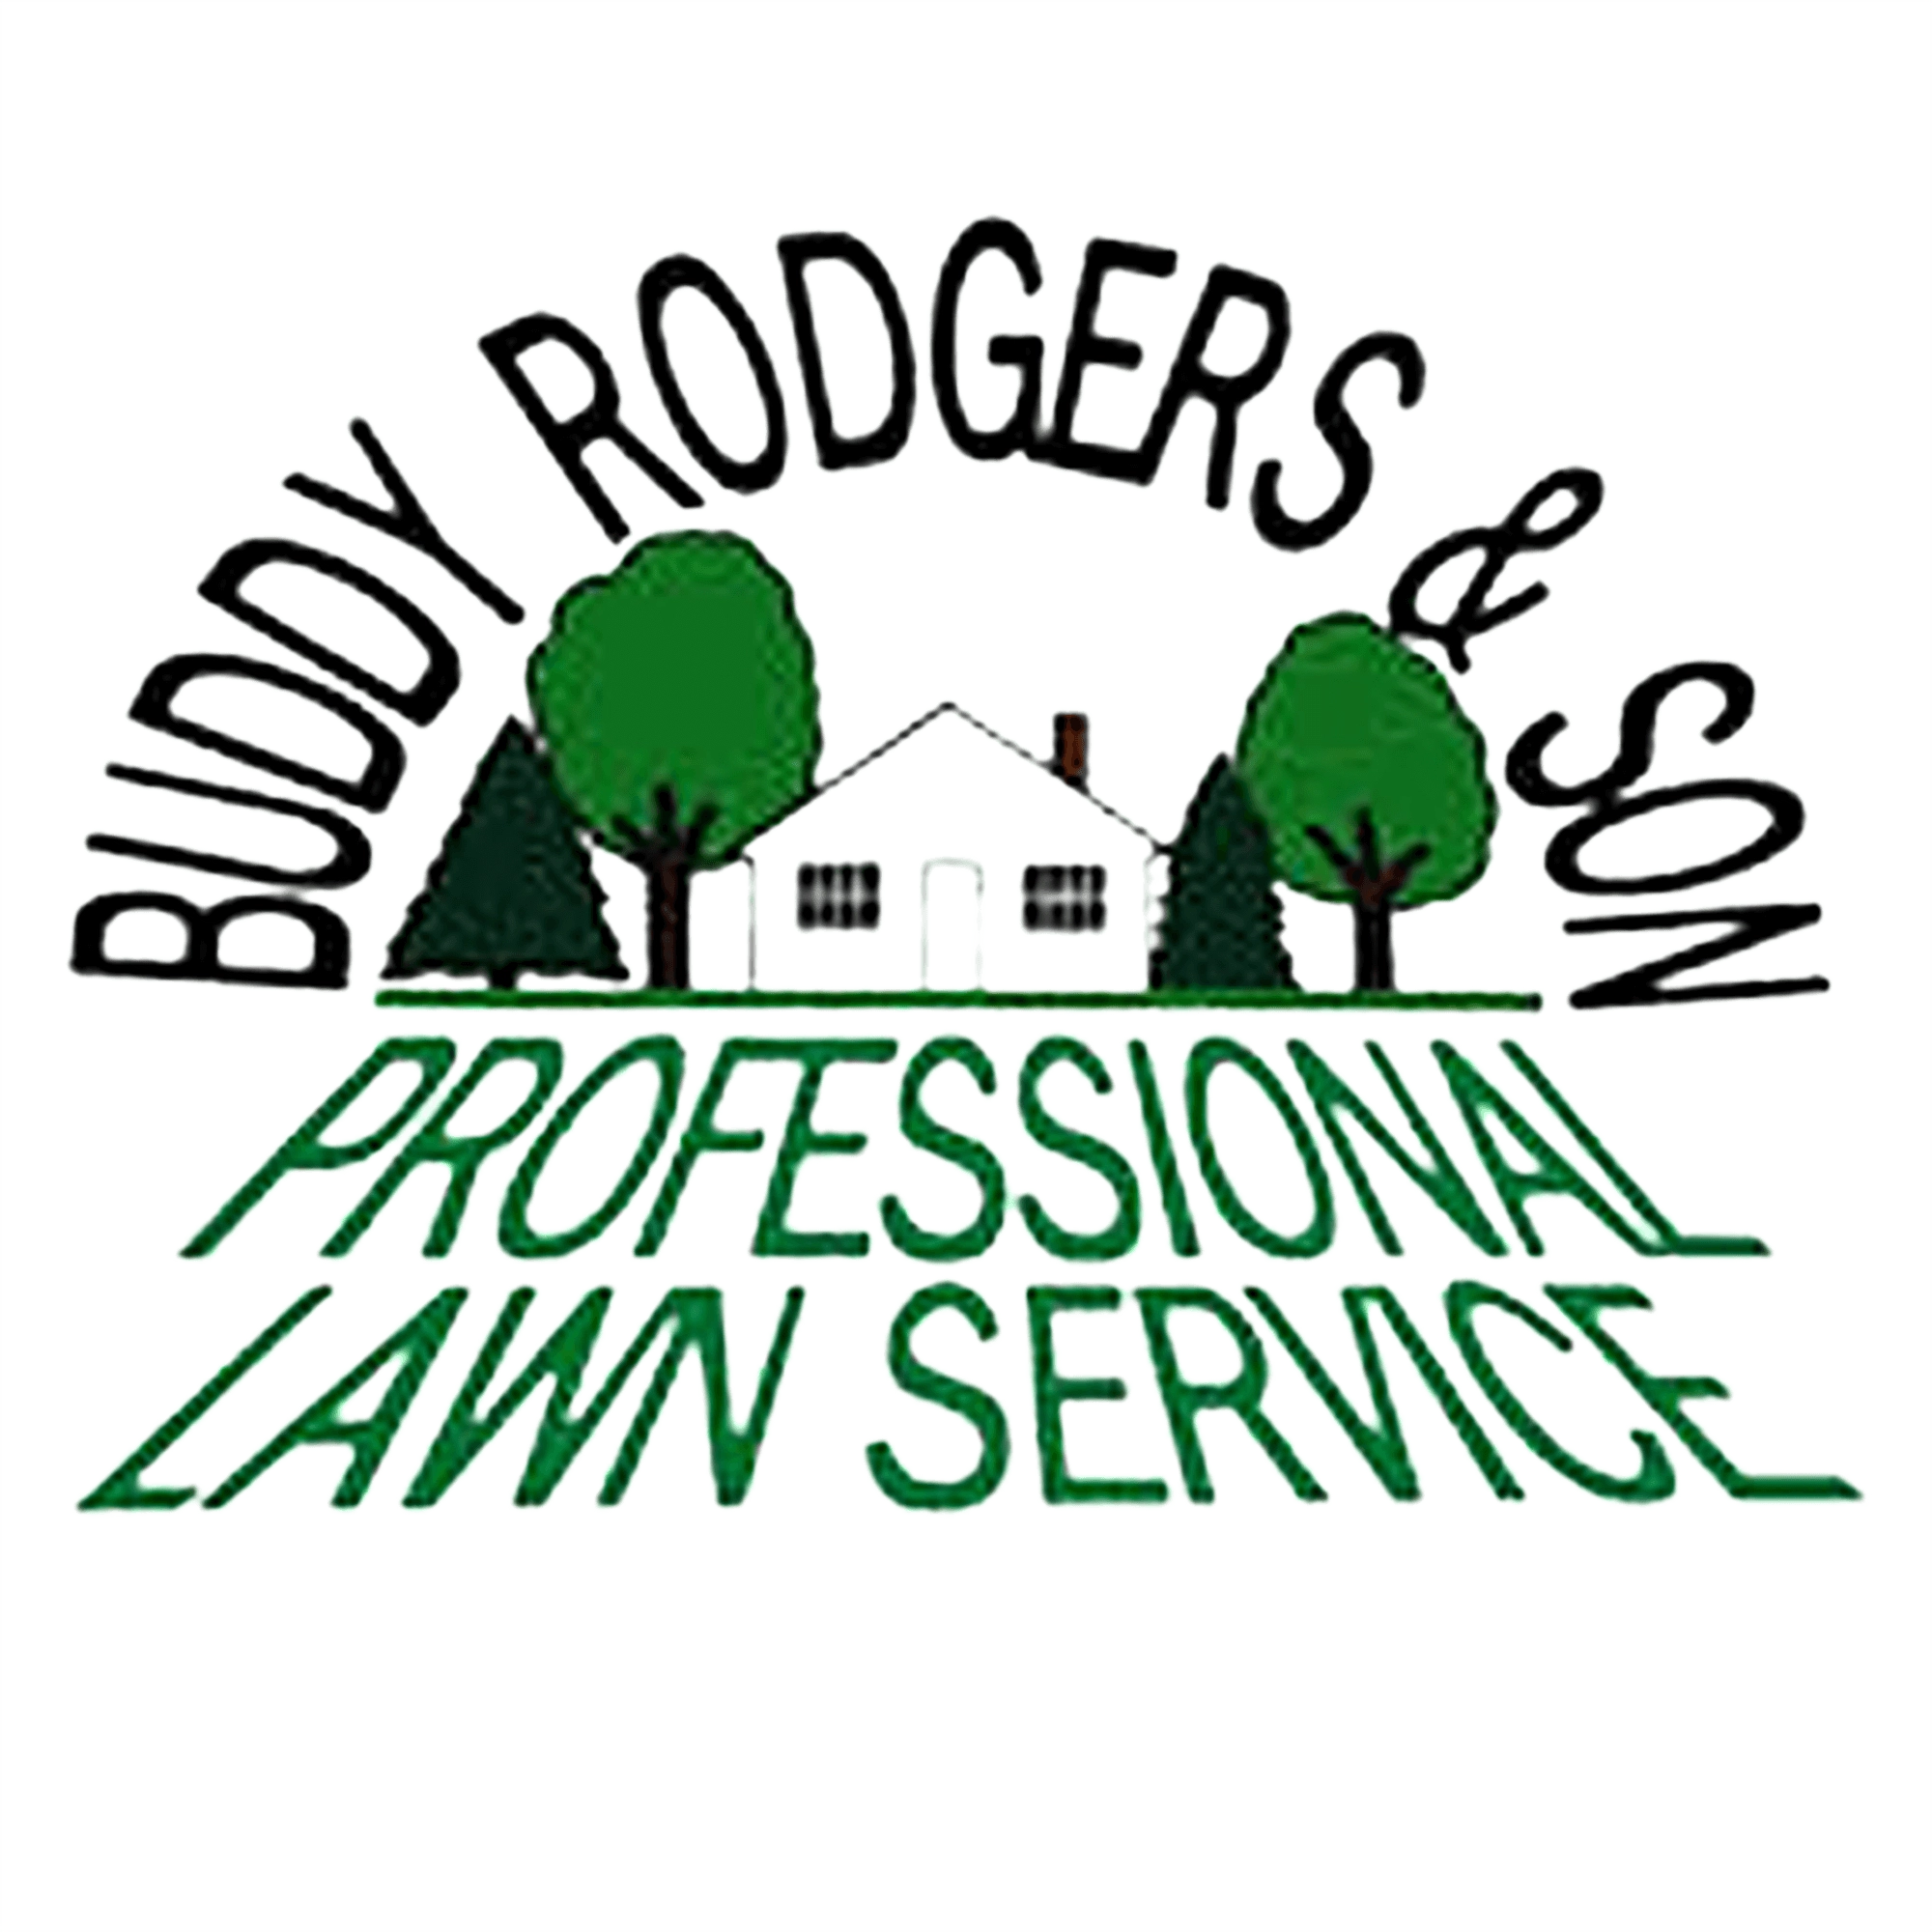 Buddy Rodgers and Son Professional Lawn Service Logo